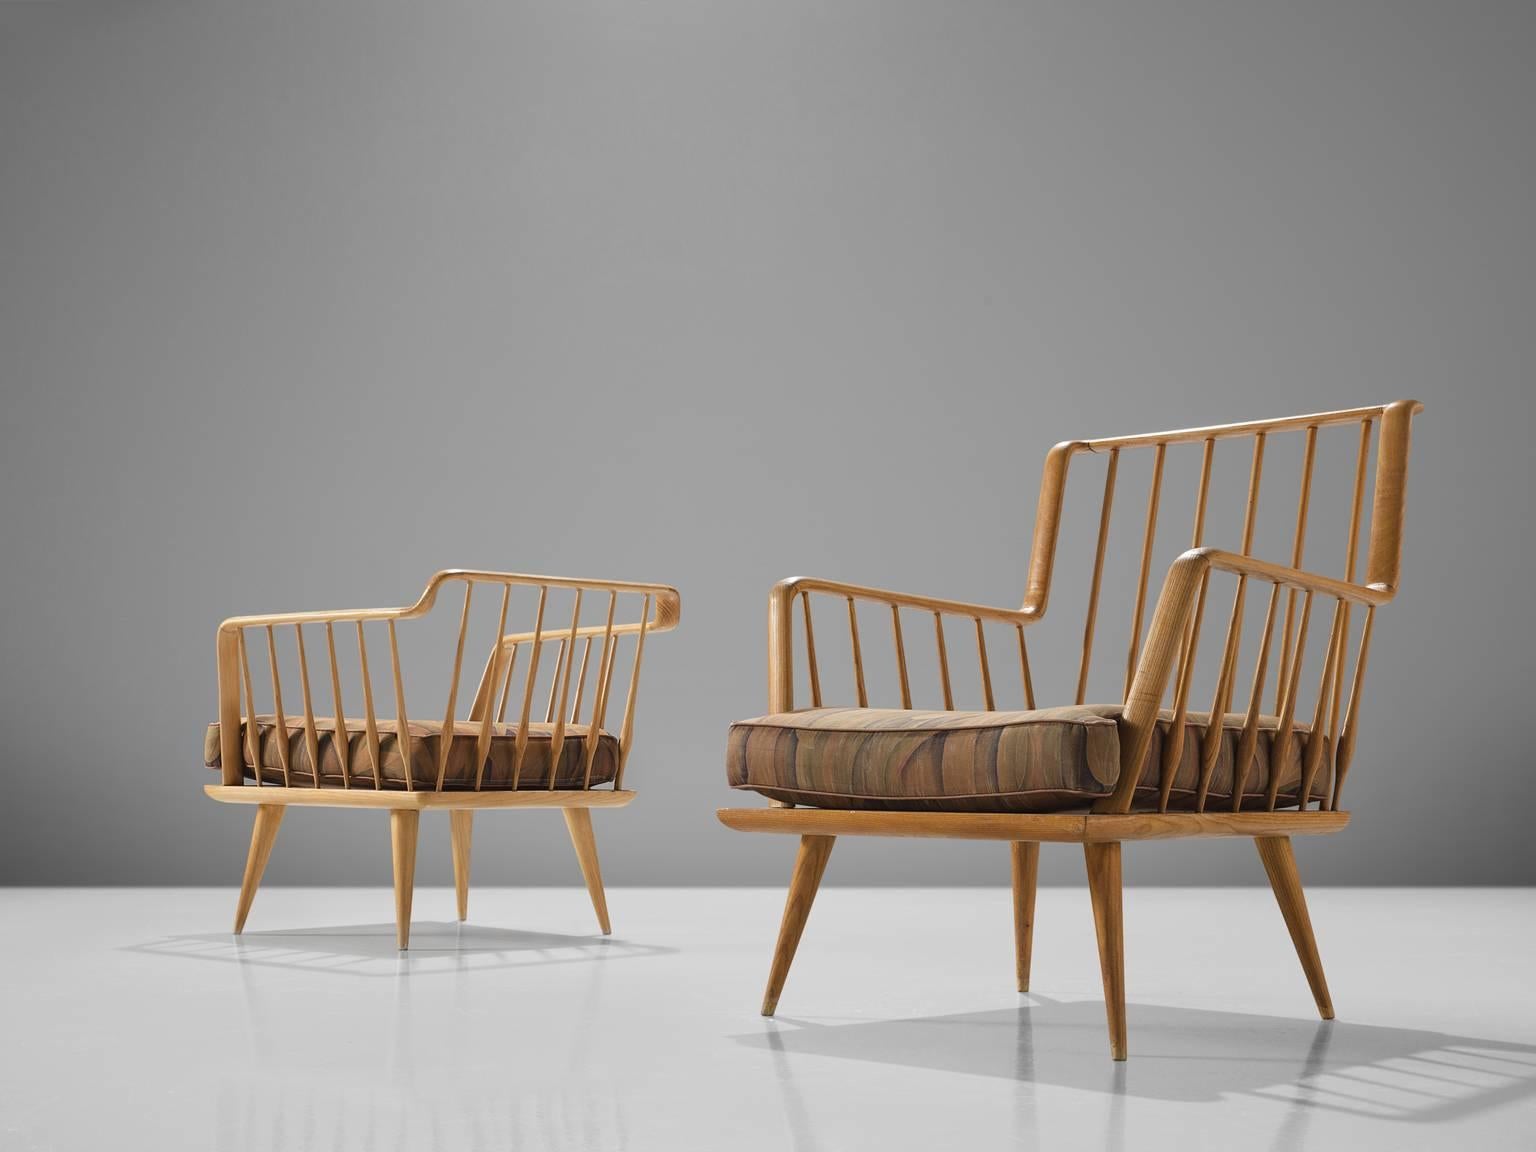 Lounge chairs in oak and fabric, France, 1960s

This set has a very sculptural, open frame. The tapered legs hold the slatted baskets and have a flowing shape. The chairs are airy and work well with our without a pillow. The chairs are provided